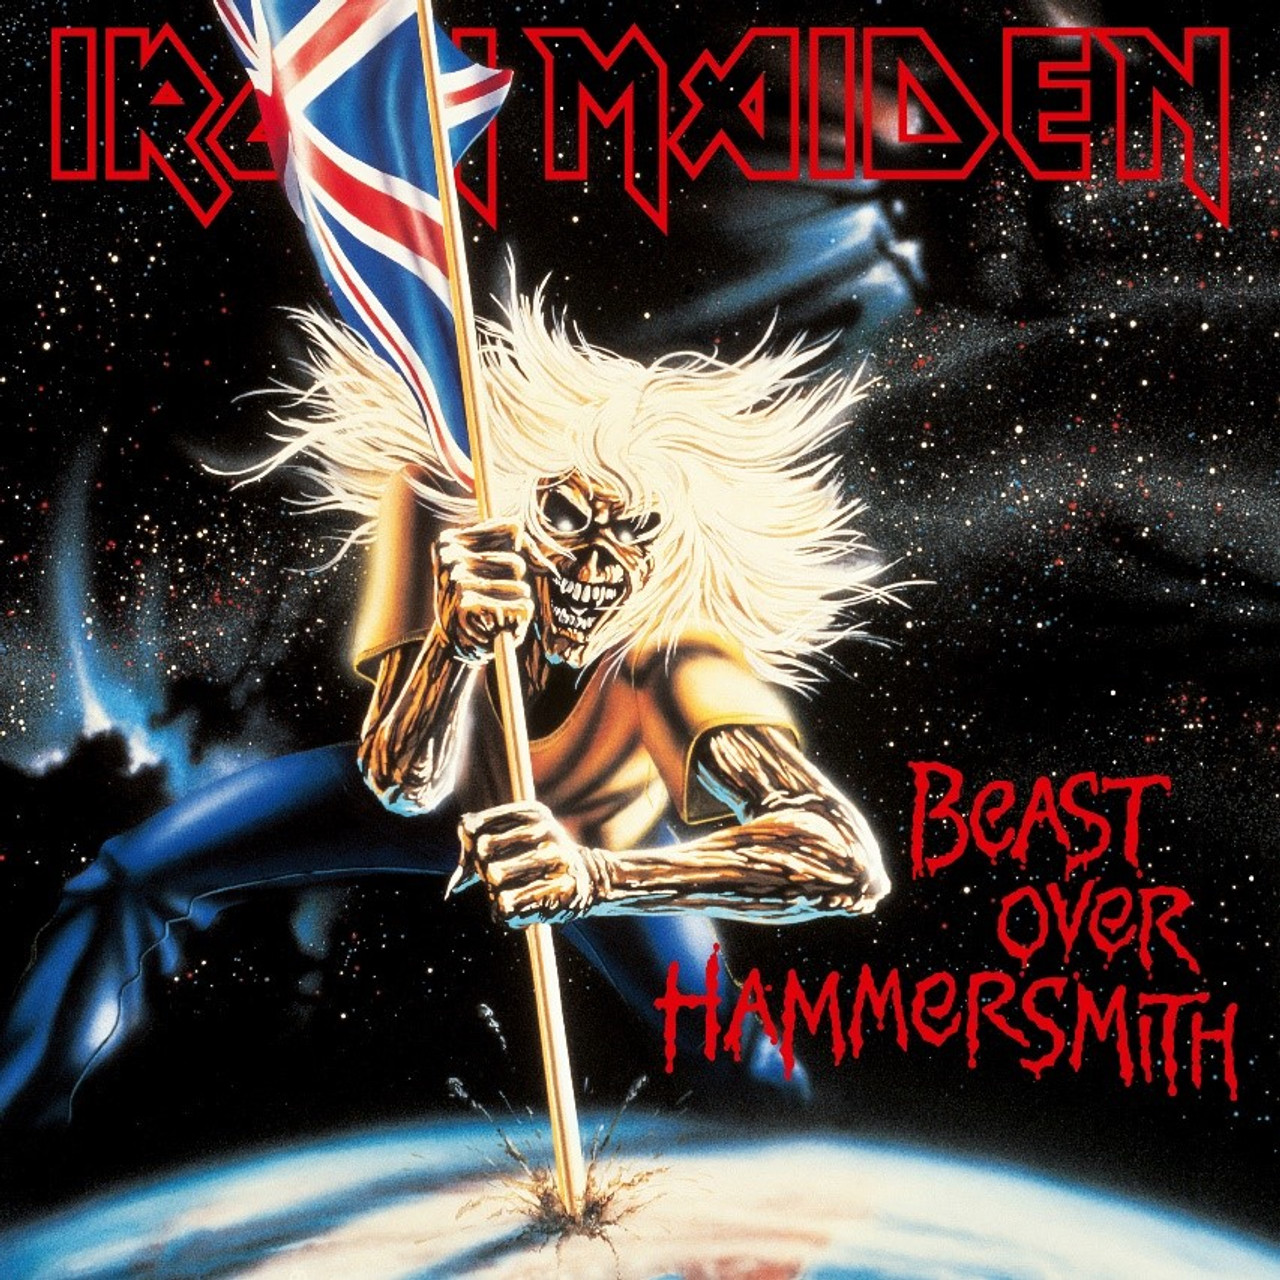 Iron Maiden 'The Number of the Beast + Beast Over Hammersmith' 40th Anniversary 3LP 180g Black Vinyl